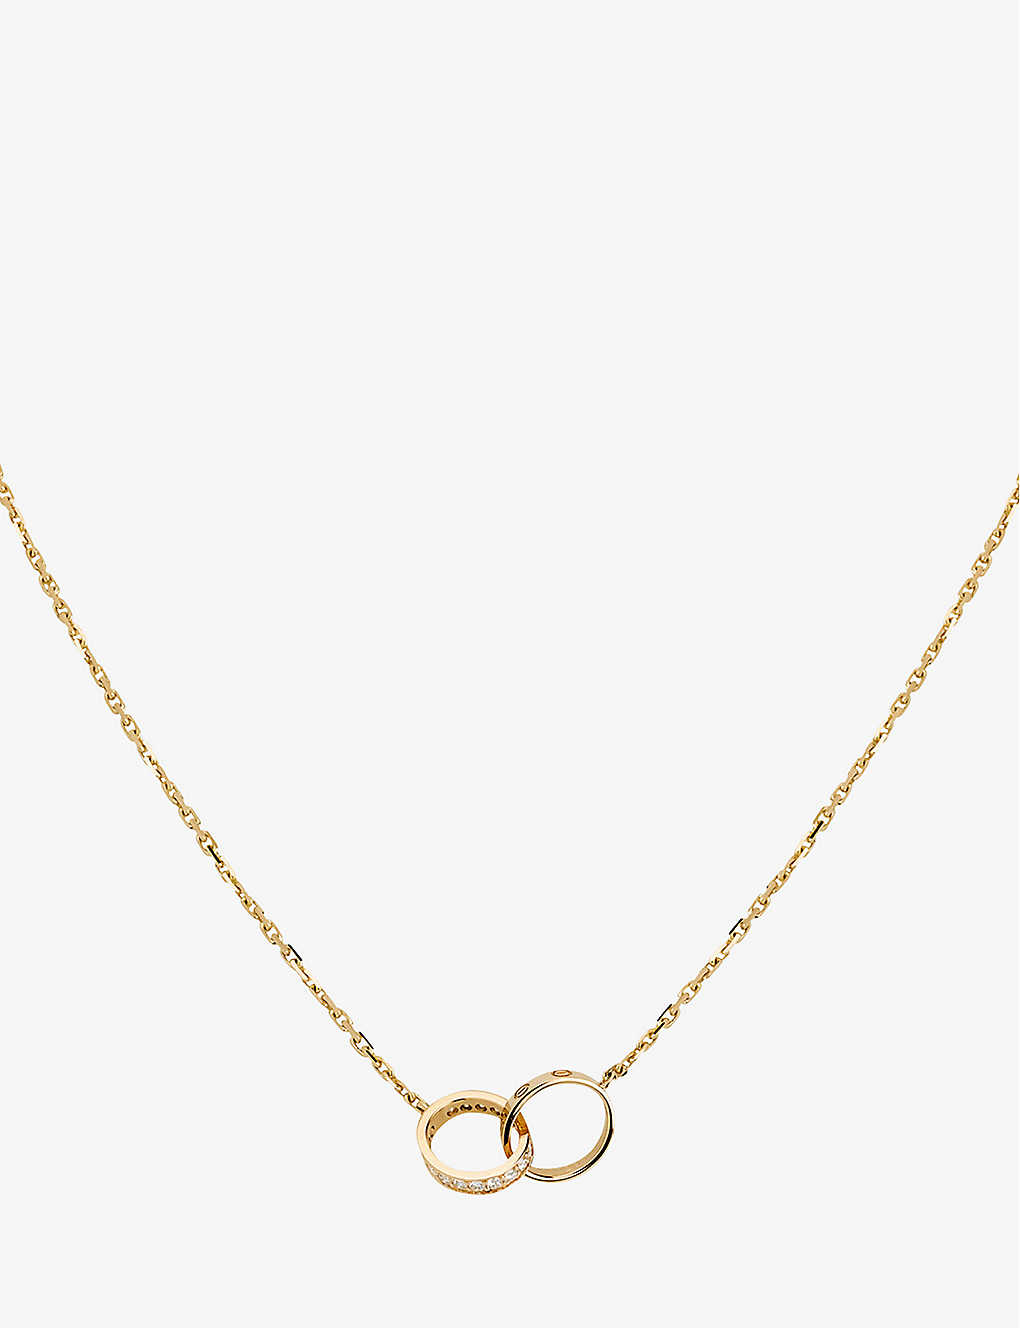 Cartier Love 18ct Gold And Diamond Necklace